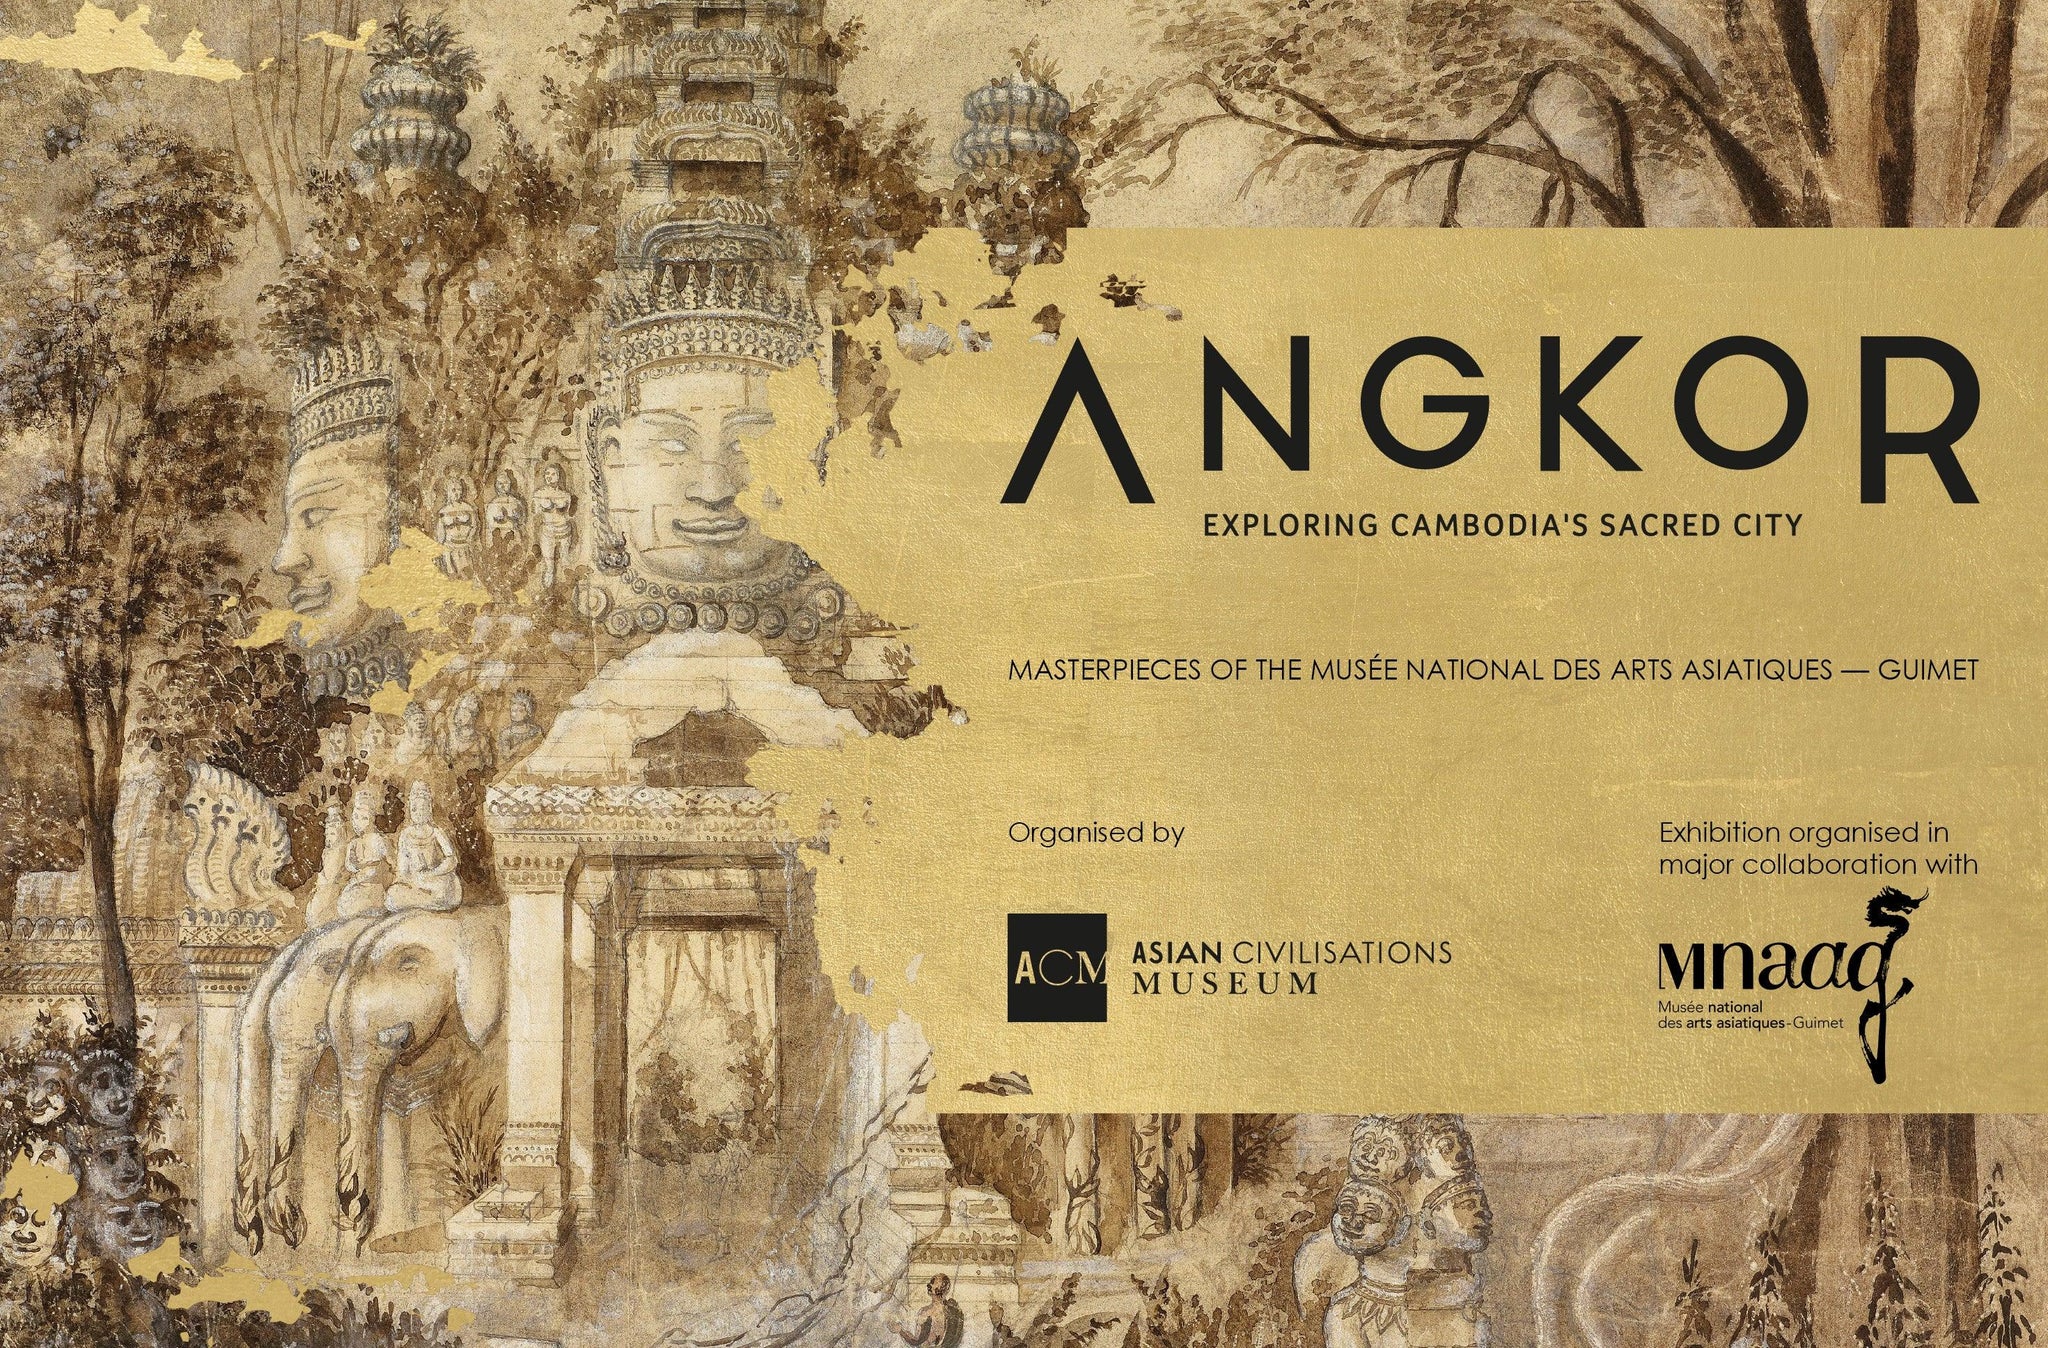 Things to do this Weekend: Explore the Sacred City of Cambodia, Angkor @ Asian Civilisations Museum!